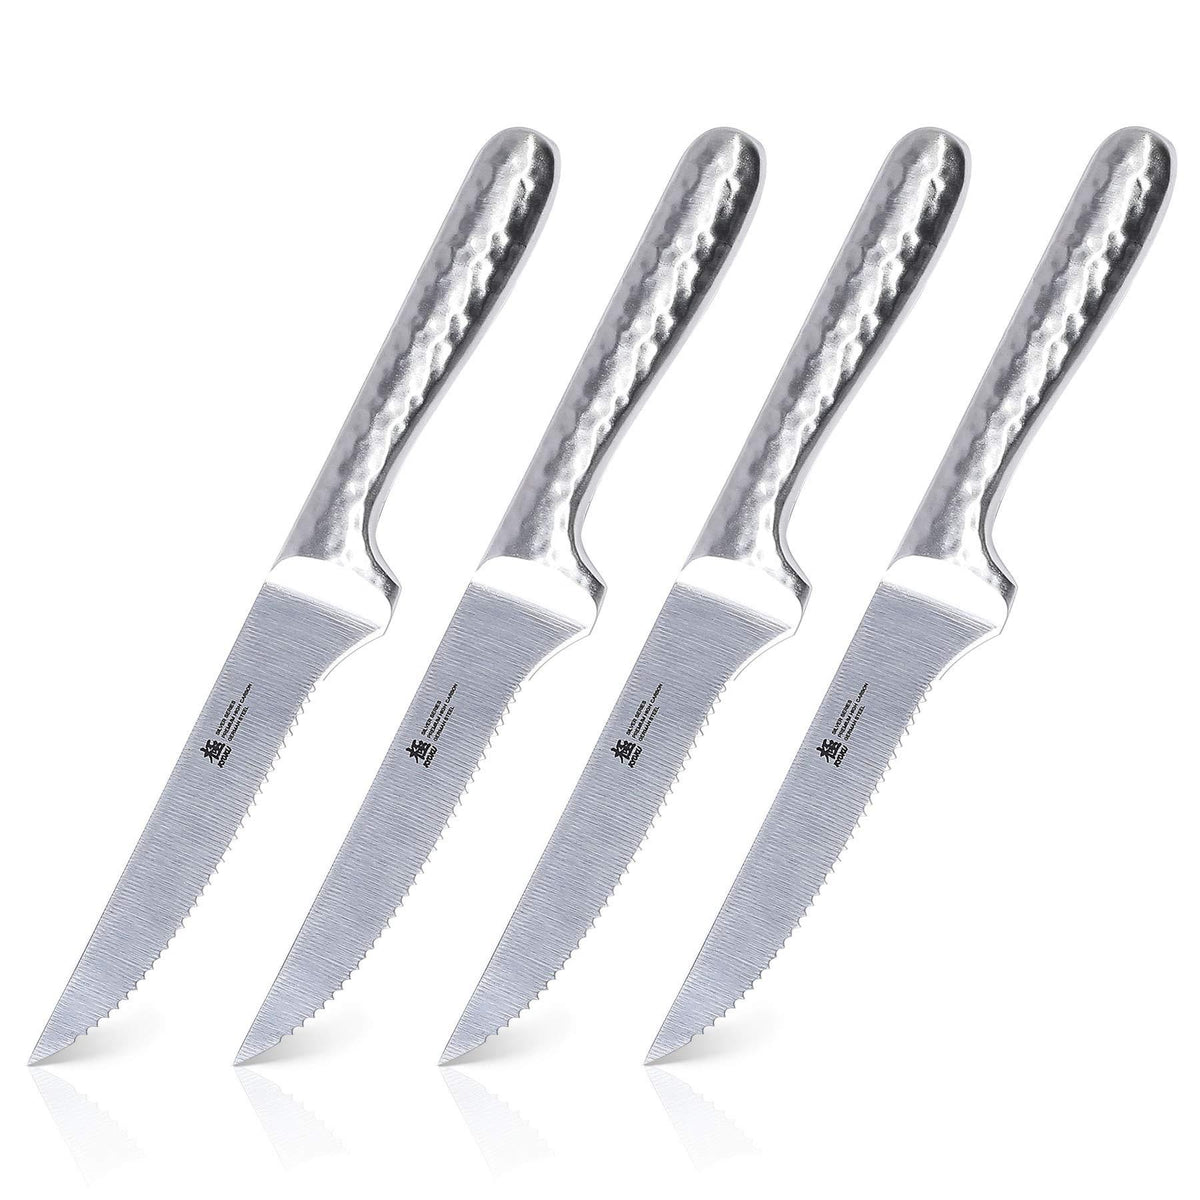 http://toroscookware.com/cdn/shop/products/5-inch-serrated-one-piece-construction-steak-knives-with-hammered-pattern-hollowed-handles-set-of-4-651779_1200x1200.jpg?v=1599406879